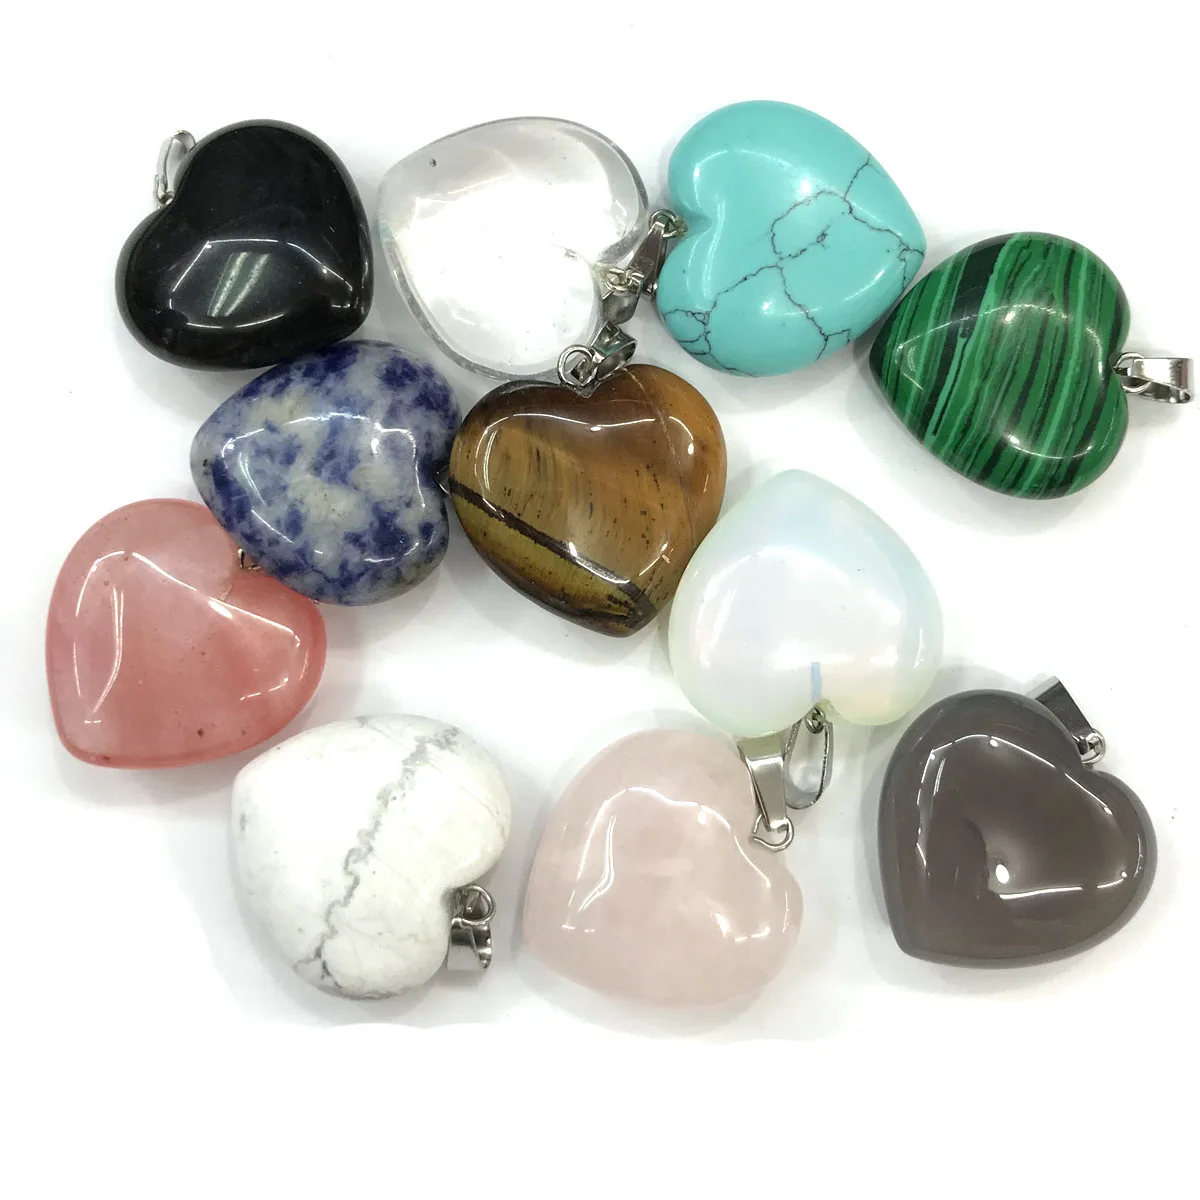 

Natural Stone Pendants Heart Shape Crystal Agates Necklace Pendant for Jewelry Making Good Quality Size 25mmx25mm